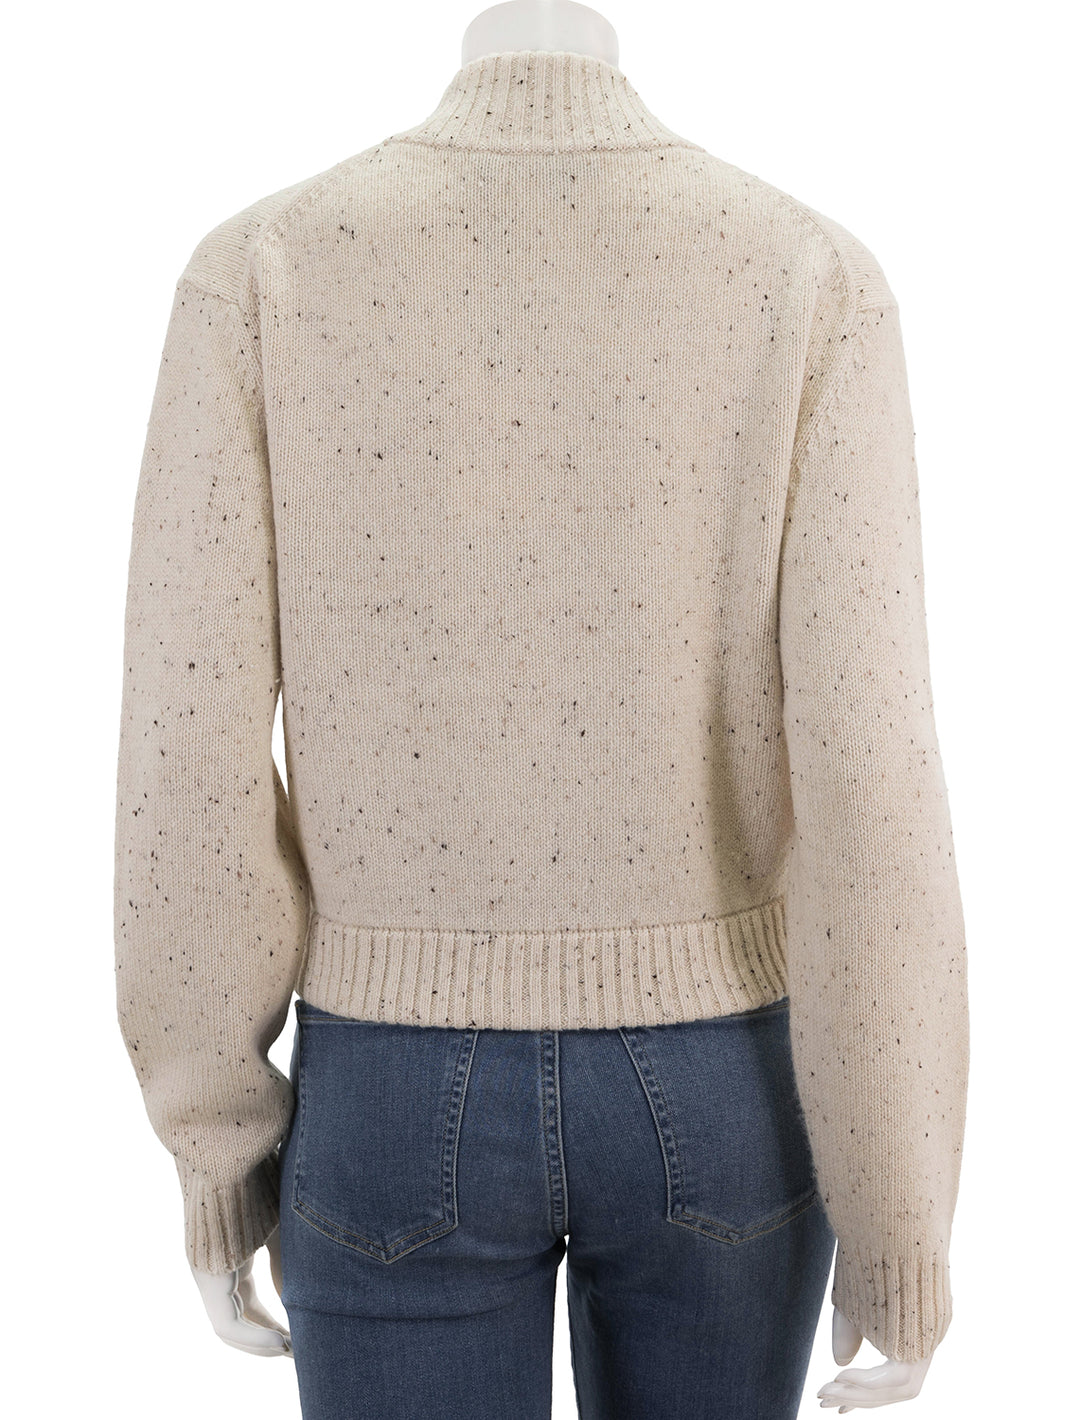 Back view of Theory's mock zip cardigan in cream.